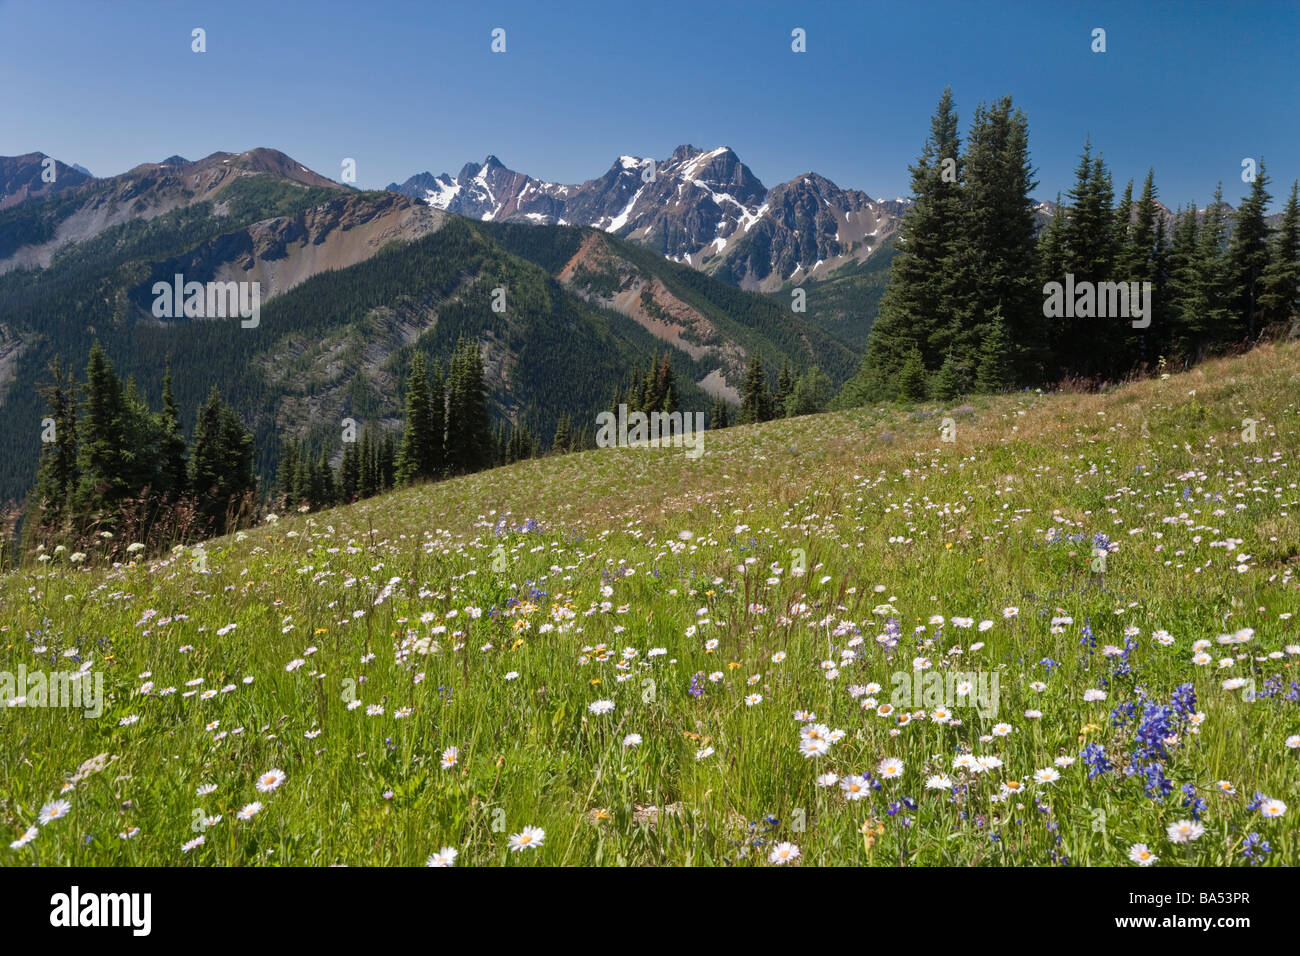 USA, Washington, Mount Baker Snoqualmie National Forest, Harts, Pass Pacific Crest Trail Stock Photo